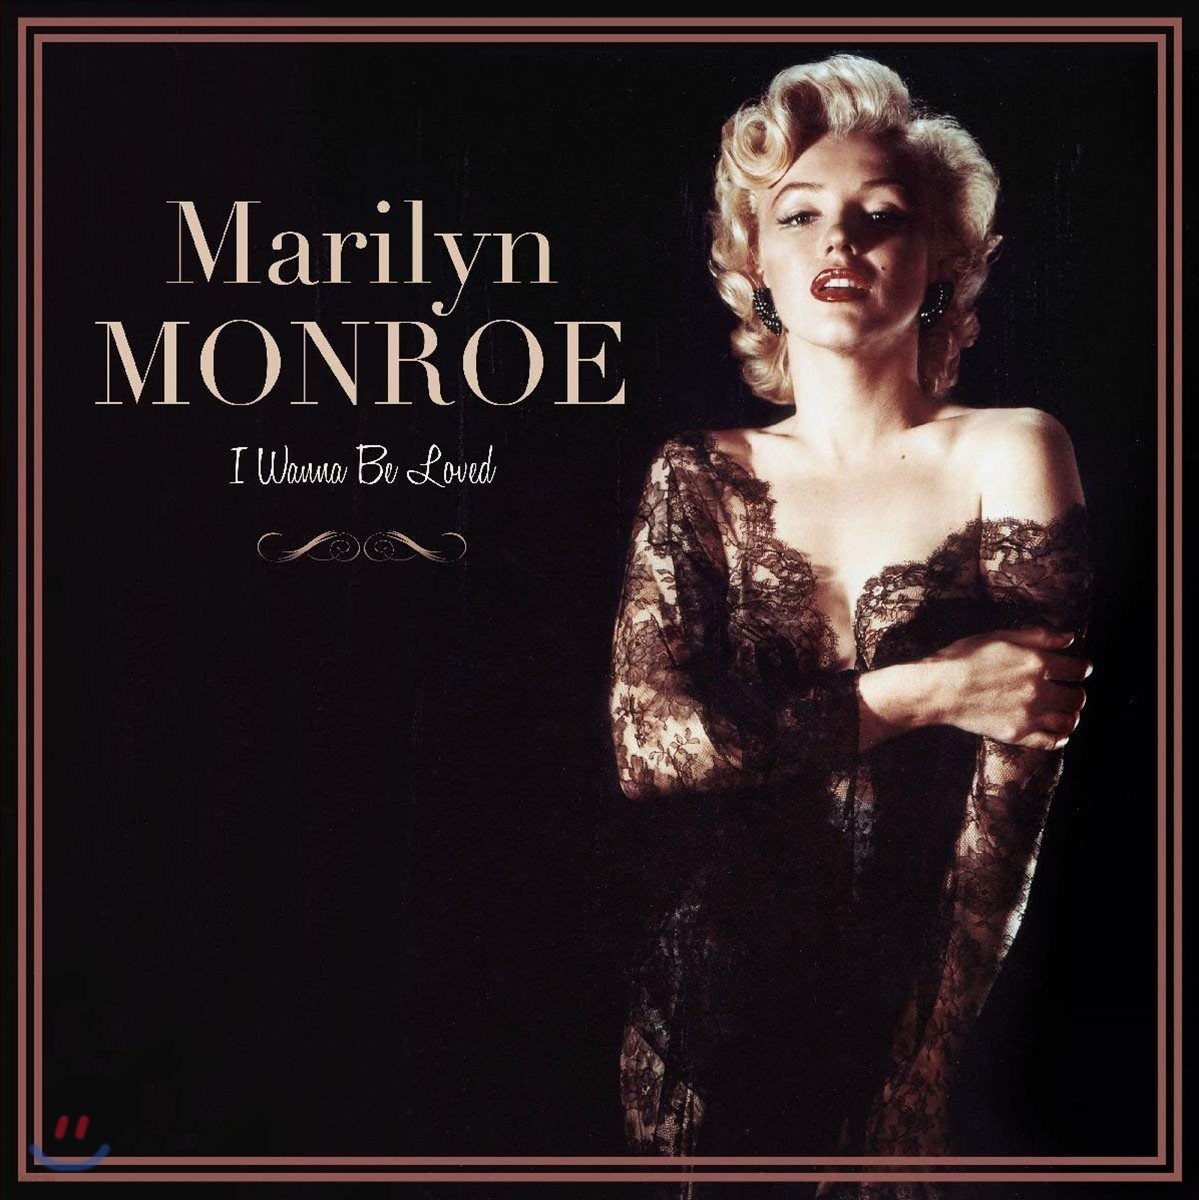 Marilyn Monroe (마릴린 먼로) - I Wanna Be Loved By You (1926-2016 Edition Anniversaire) [LP]